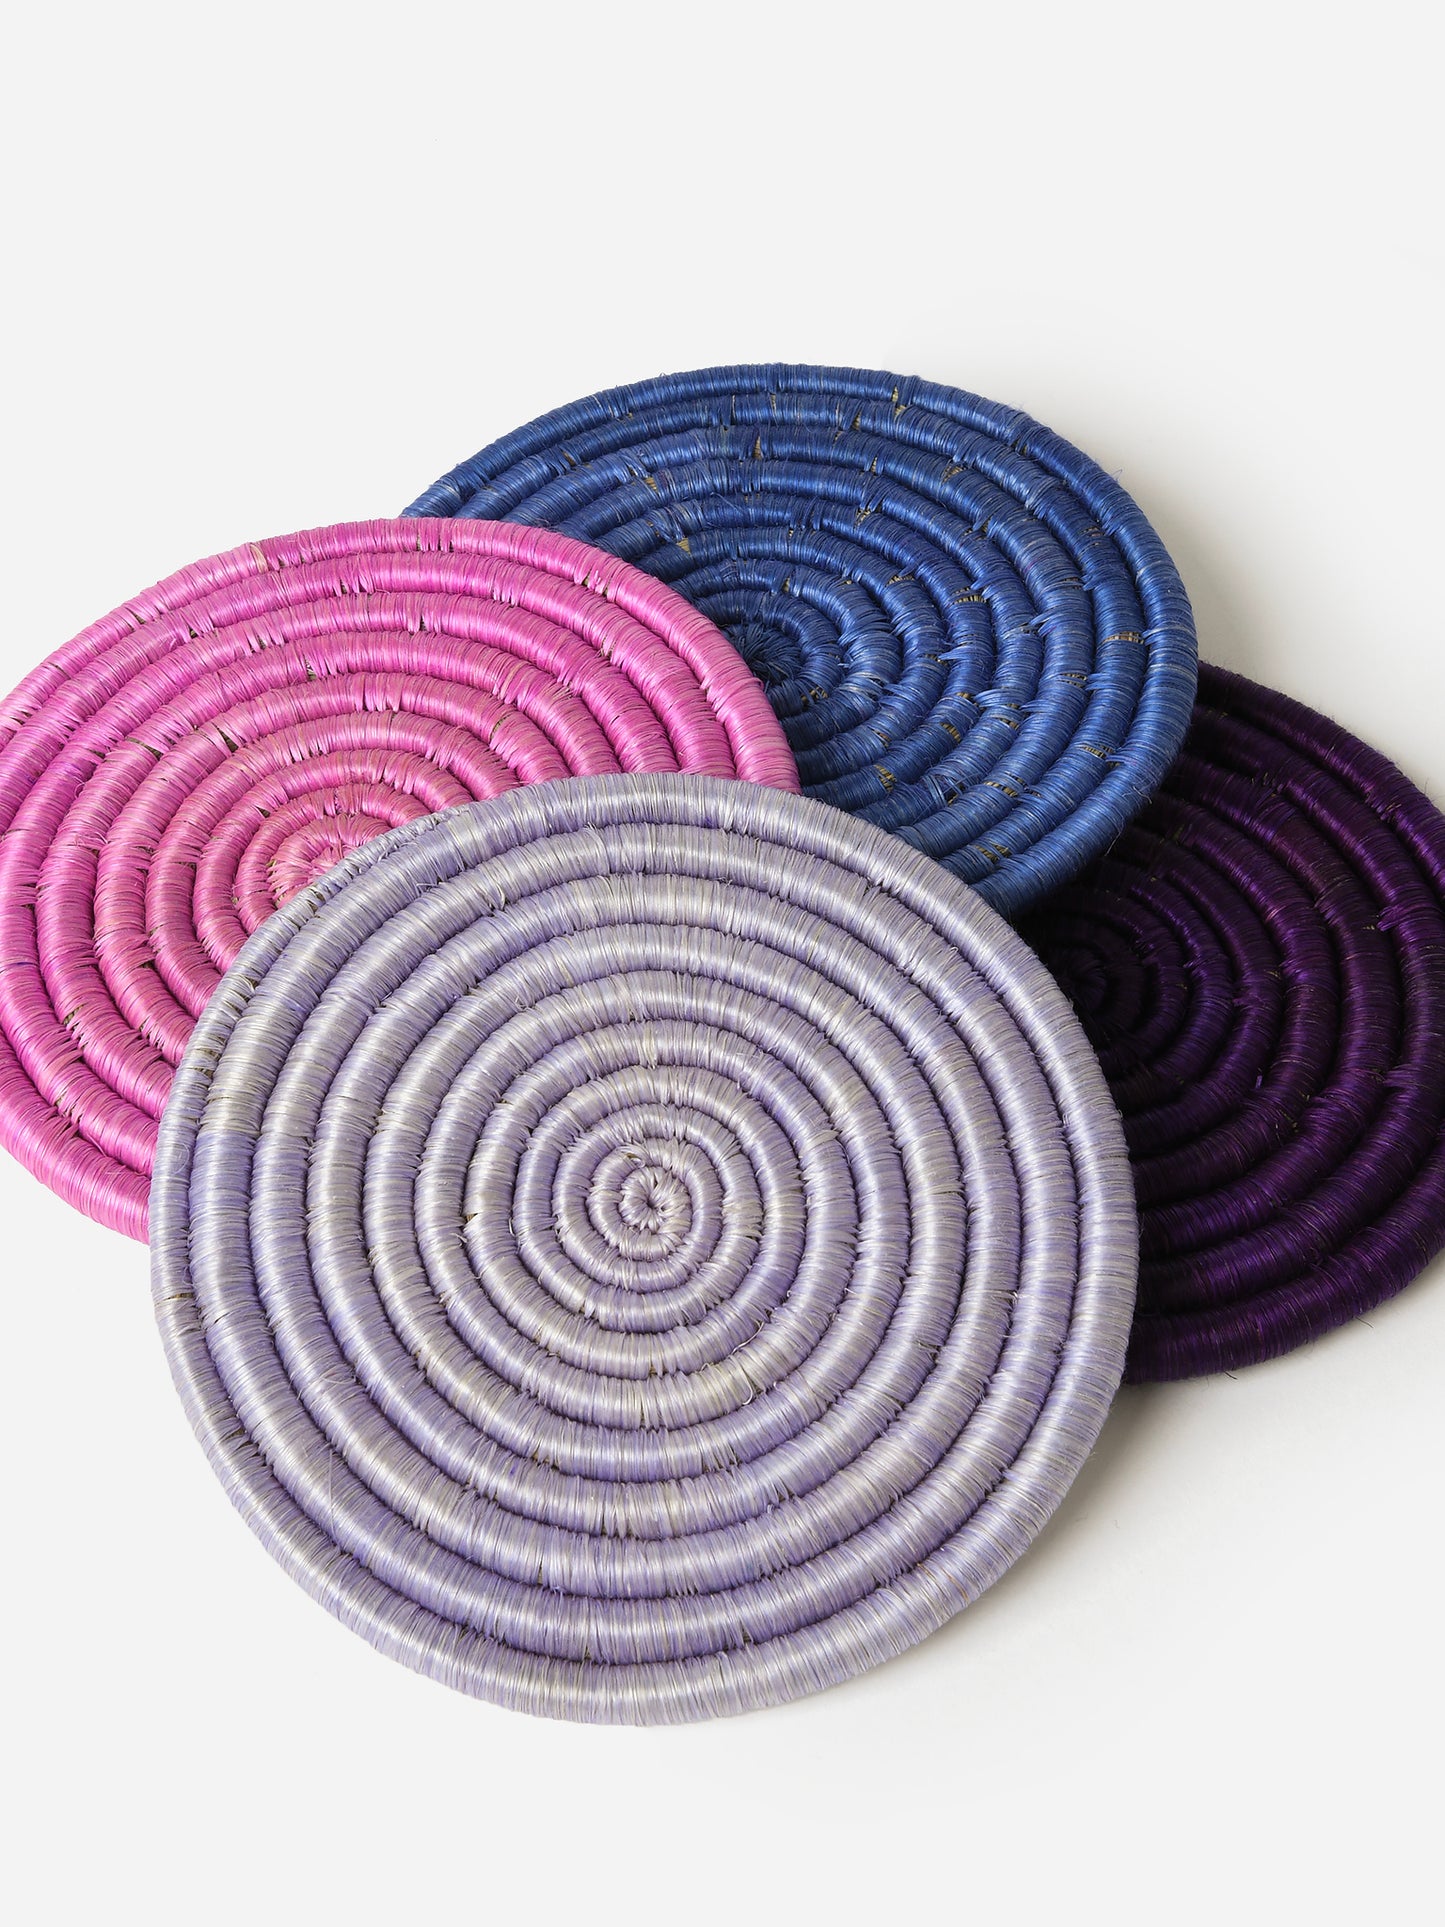 Indego Africa Solid Mixed Set of 4 Coasters